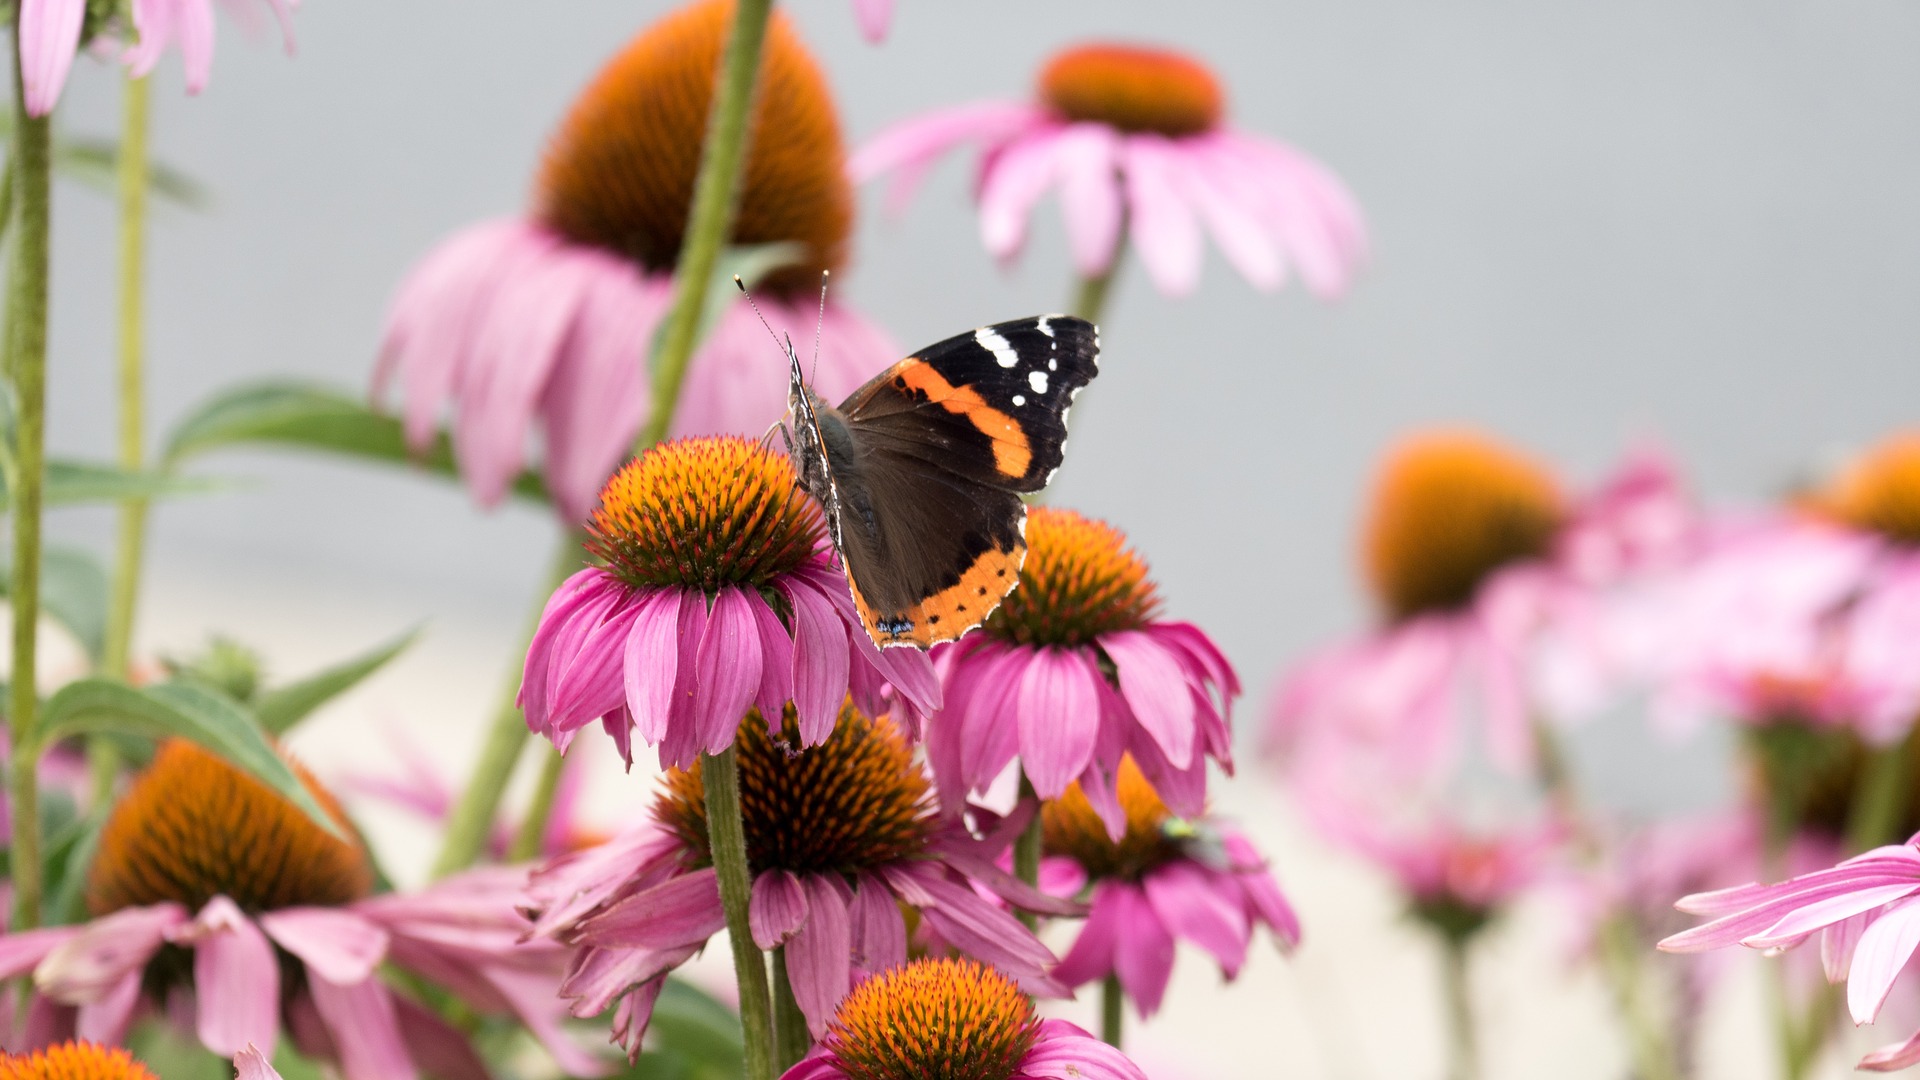 Purple coneflower with butterfly.